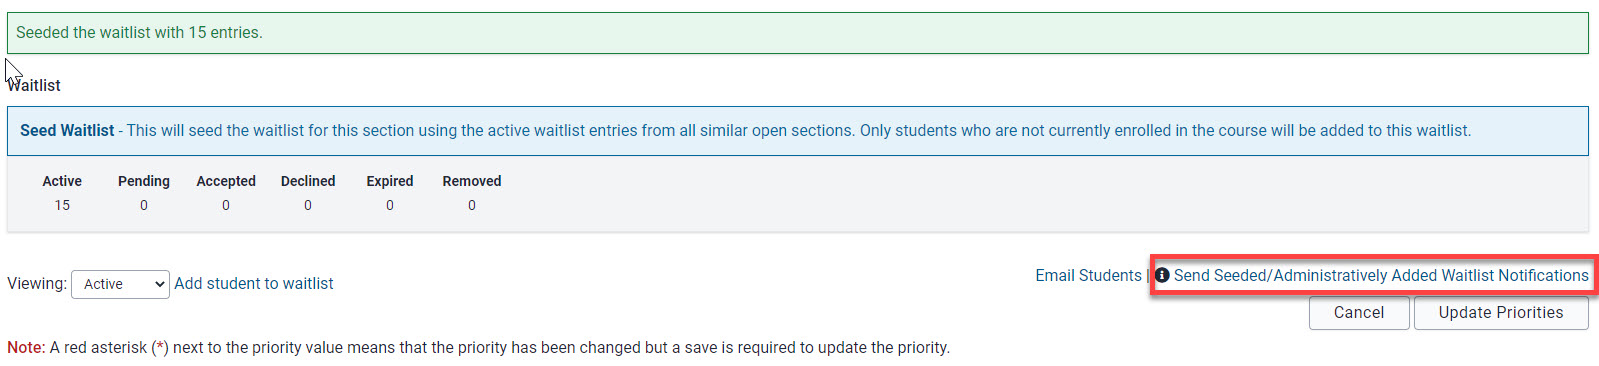 "Send Seeded/Administratively Added Waitlist Notifications" link